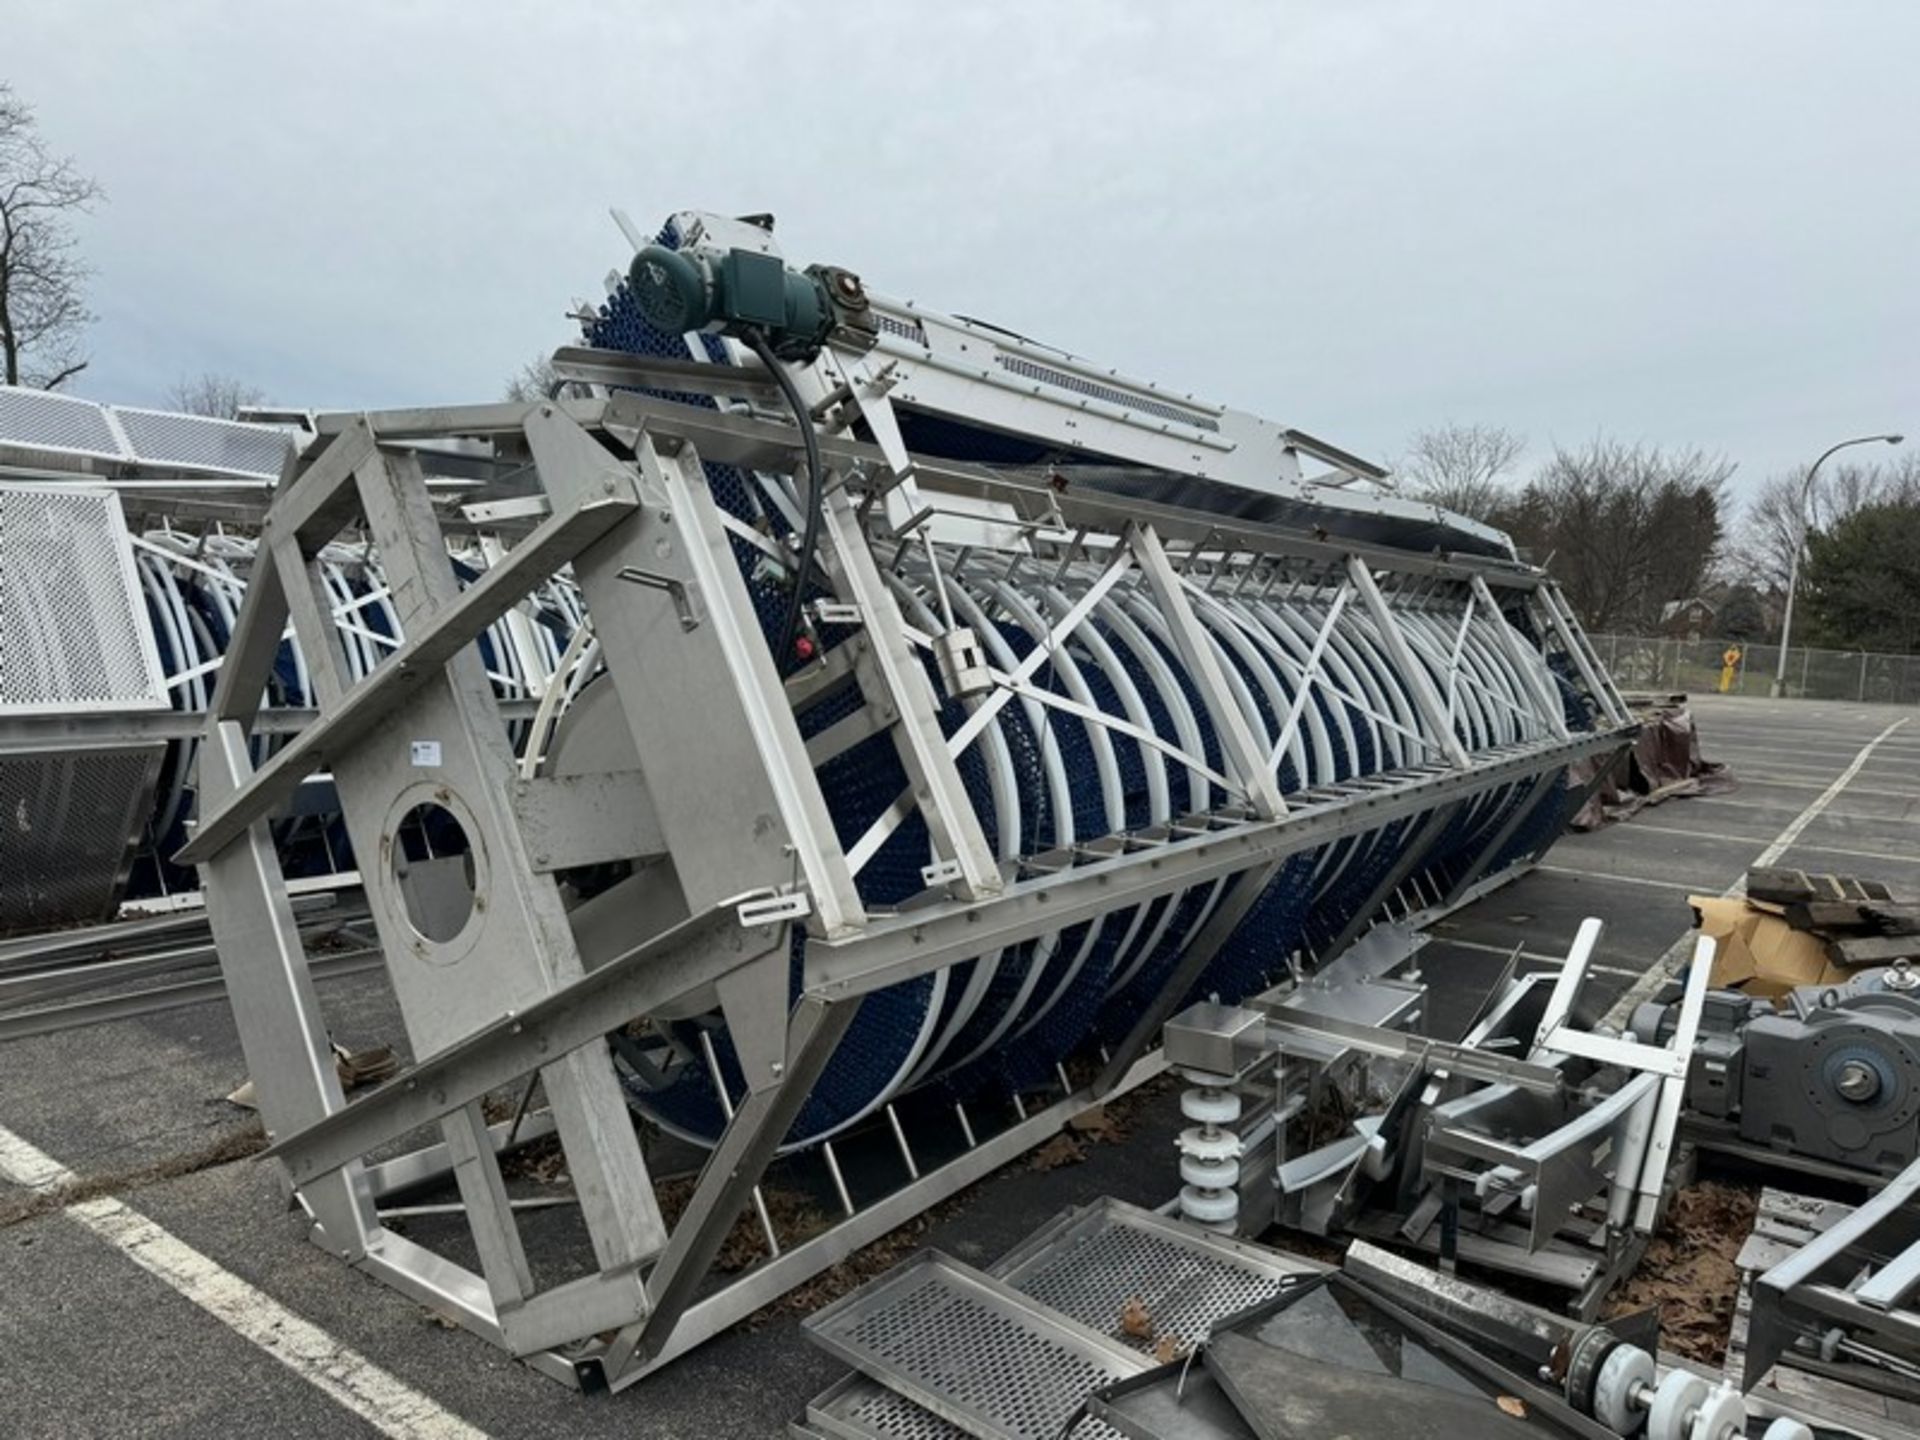 Spiral Conveyor System, Overall Height: Aprox. 27 ft. H x 16" W Conveyor Chain, with Top Mounted - Image 2 of 9